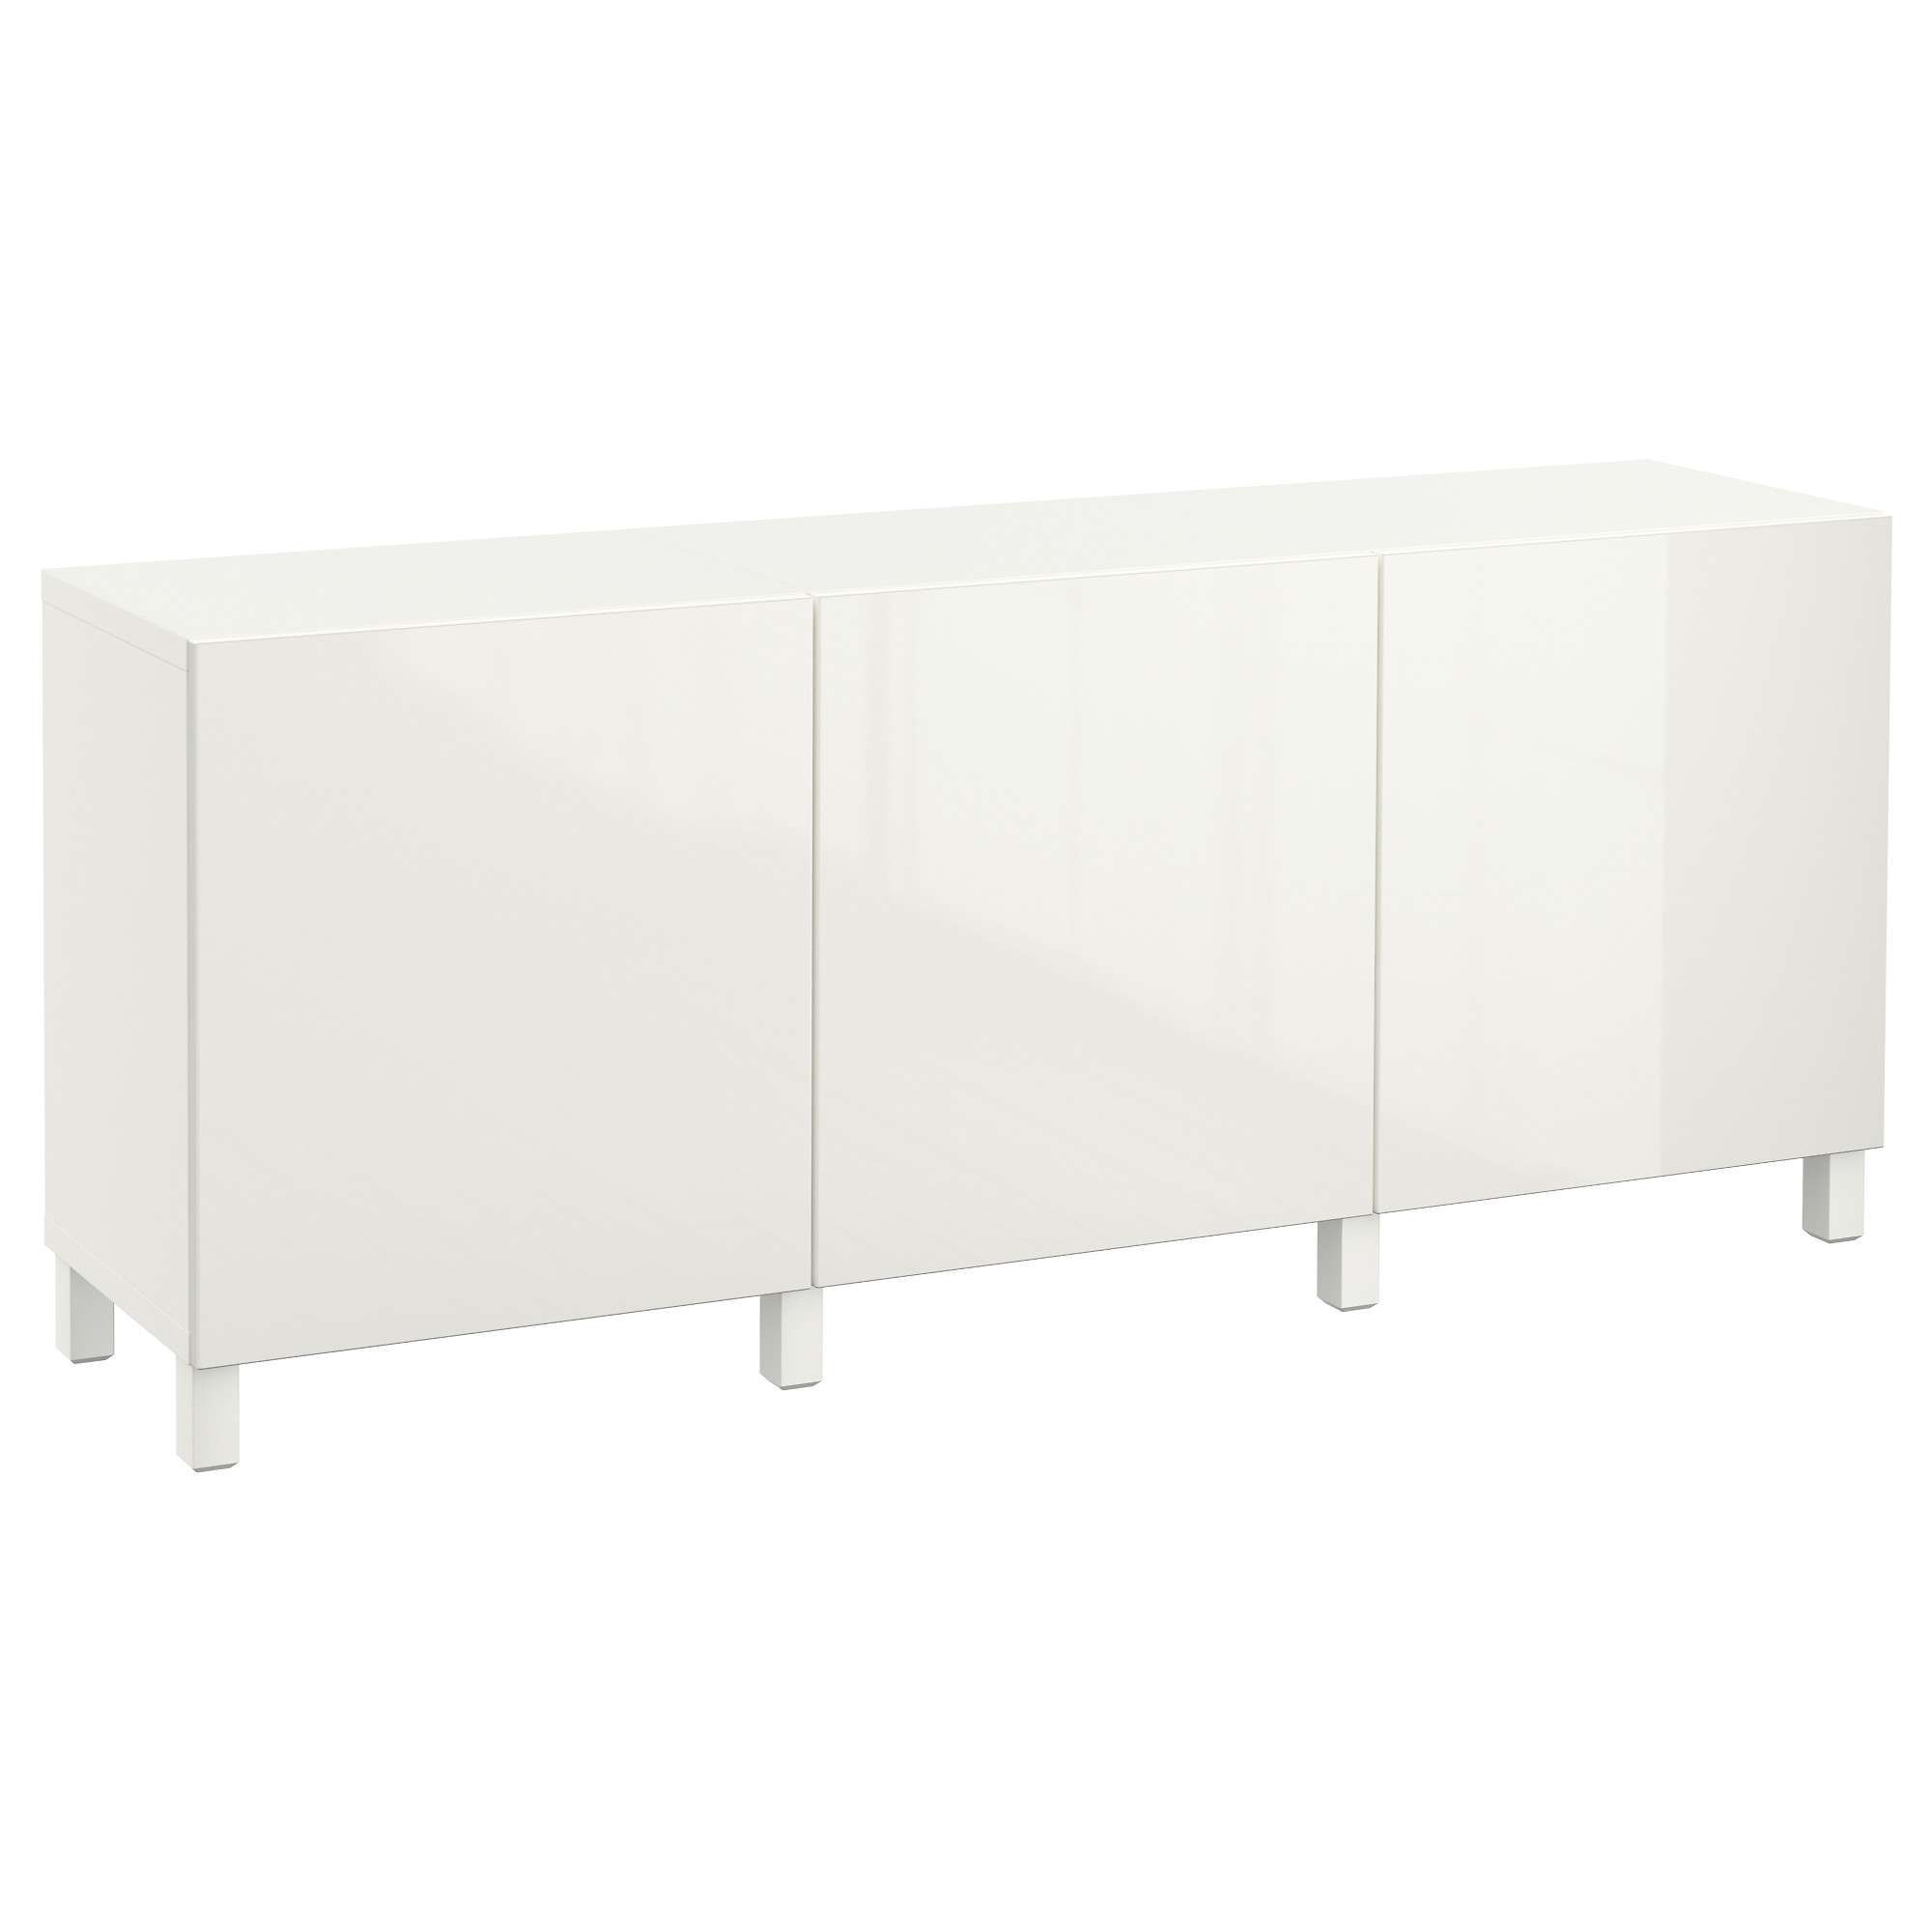 Bestå Storage Combination With Doors – White/selsviken High Gloss For Ikea Besta Sideboards (View 18 of 20)